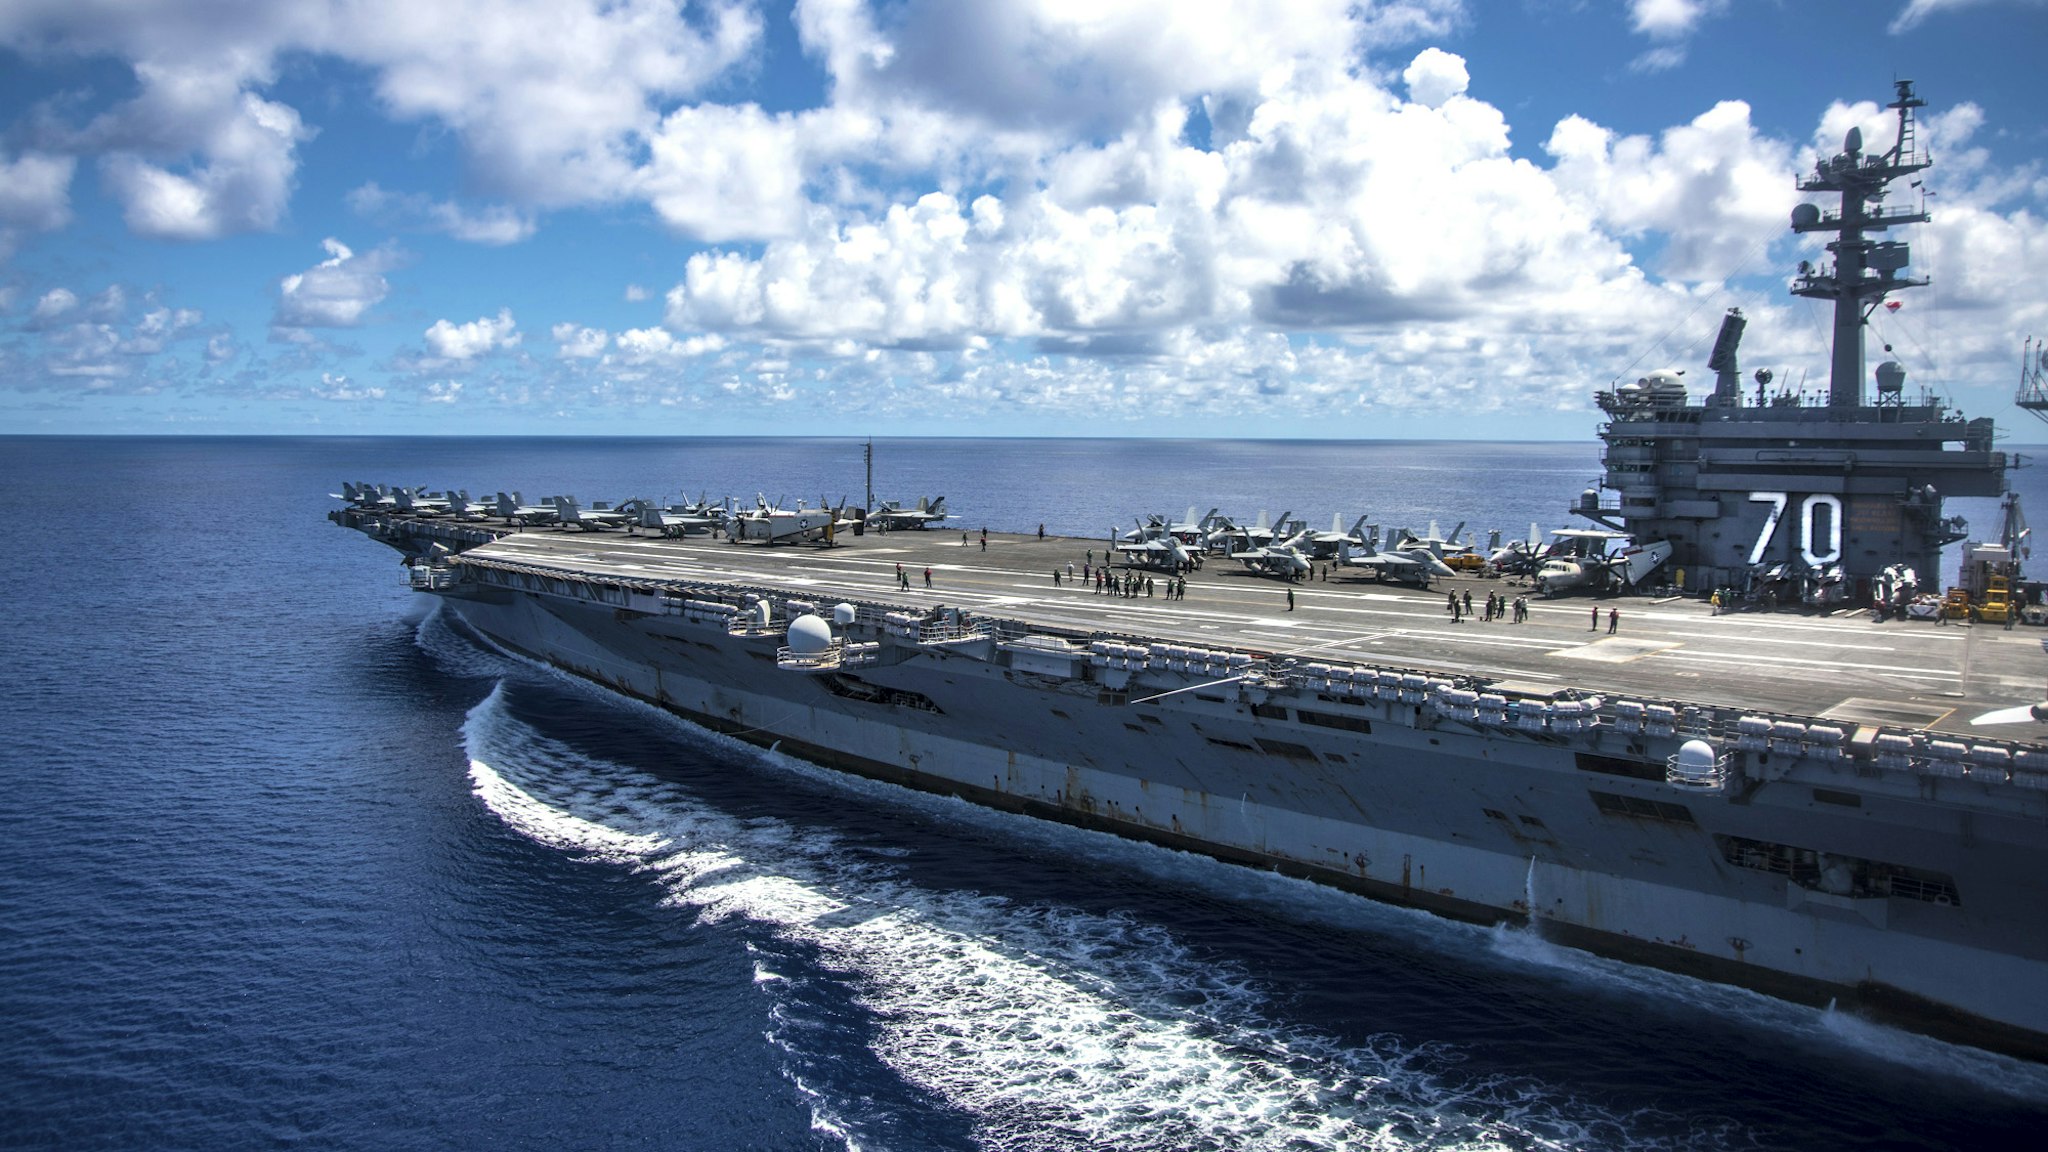 PHILIPPINE SEA - APRIL 23: In this photo provided by the U.S. Navy, the USS Carl Vinson transits the Philippine Sea while conducting a bilateral exercise with the Japan Maritime Self-Defense Force on April 23, 2017 in the Philippine Sea. The Carl Vinson Carrier Strike Group is operating as part of U.S. 7th Fleet, but remains deployed under the U.S. 3rd Fleet Forward operating concept, which provides additional options to the Pacific Fleet commander. U.S. Navy aircraft carrier strike groups have patrolled the Indo-Asia-Pacific regularly and routinely for more than 70 years.